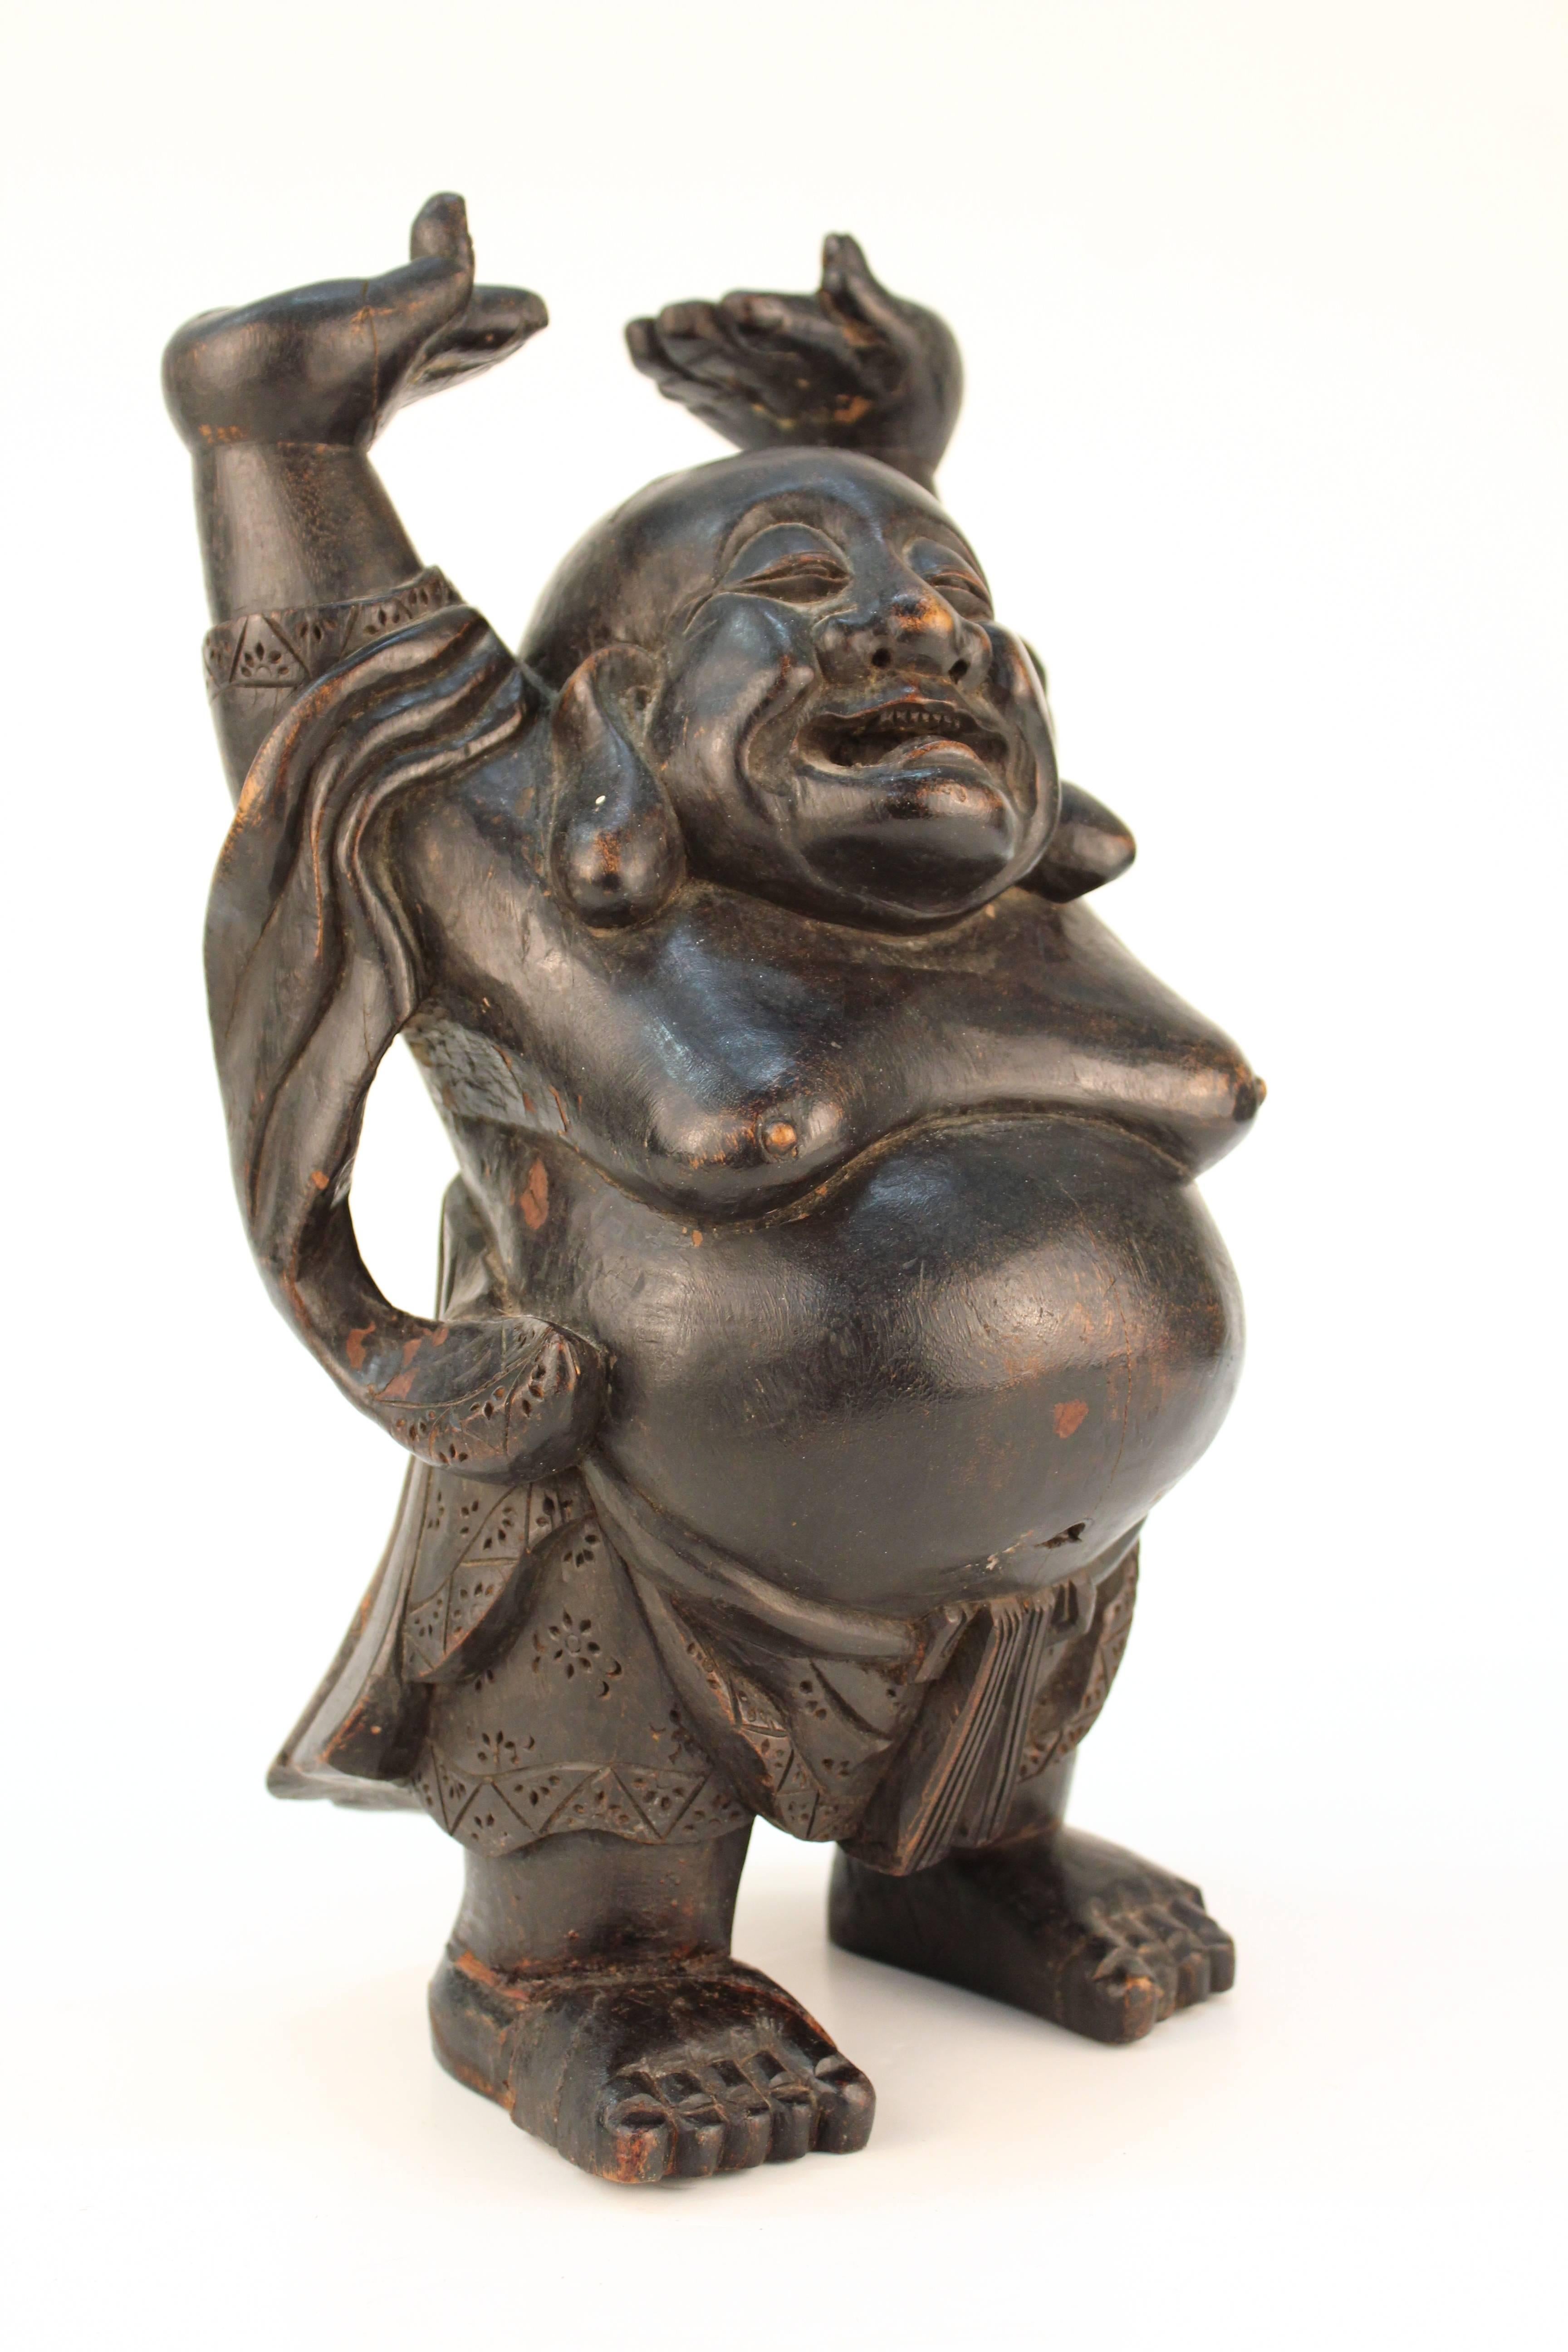 A large wooden carving of the laughing Buddha, Ho Tai. Crafted in China. Despite some age appropriate wear to the wood, the sculpture remains in overall good vintage condition.

110622
 